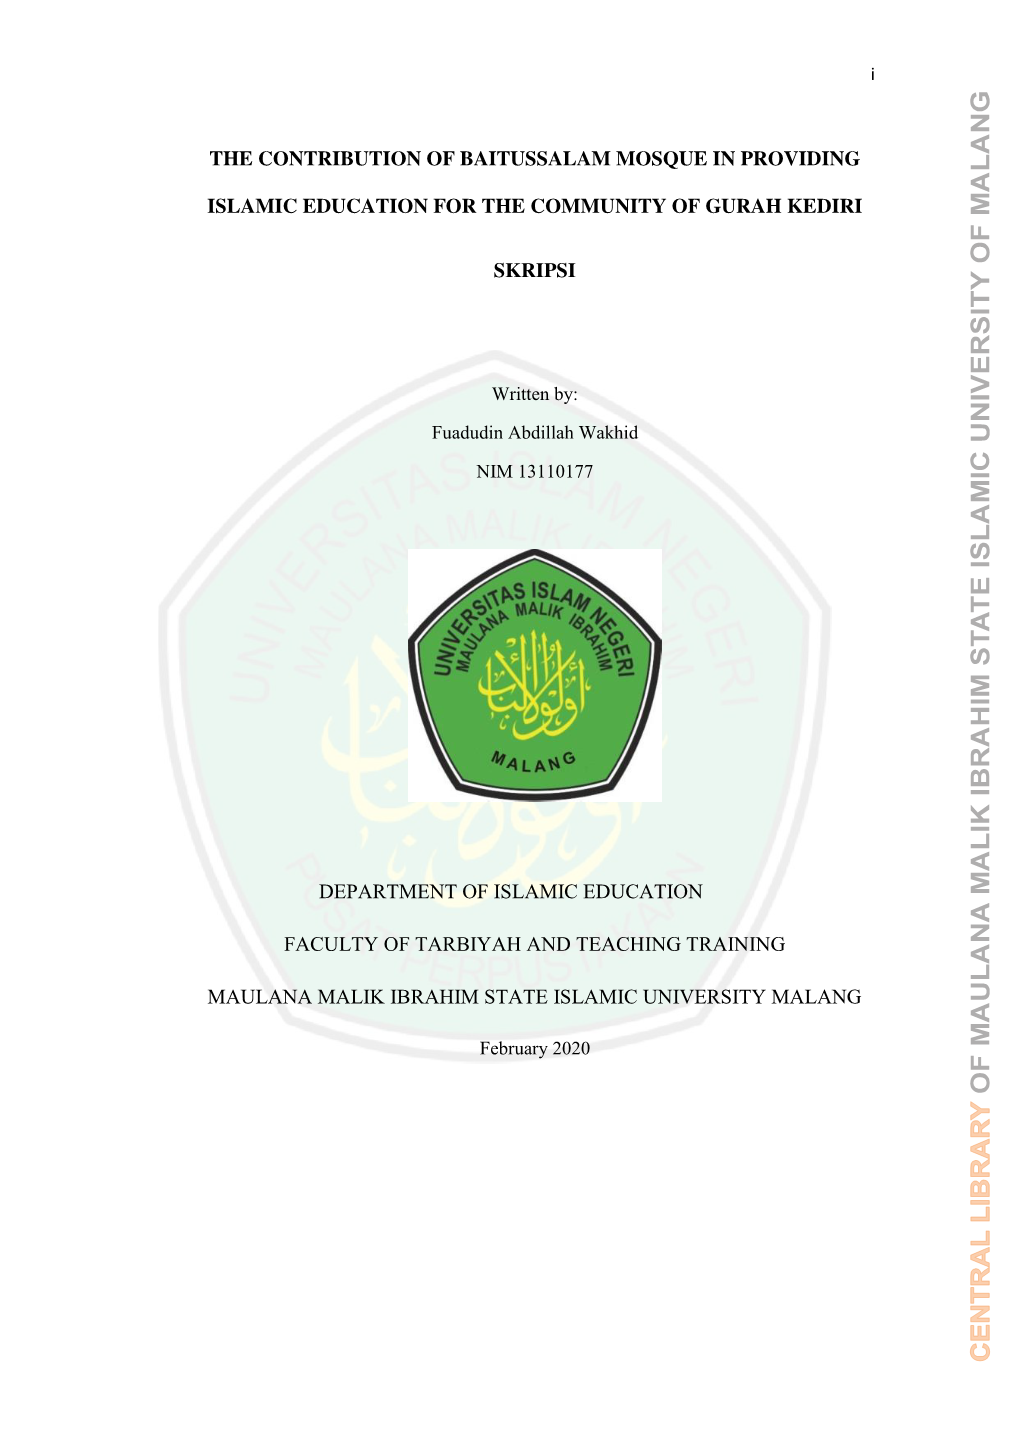 The Contribution of Baitussalam Mosque in Providing Islamic Education for the Community of Gurah Kediri Skripsi Department of Is